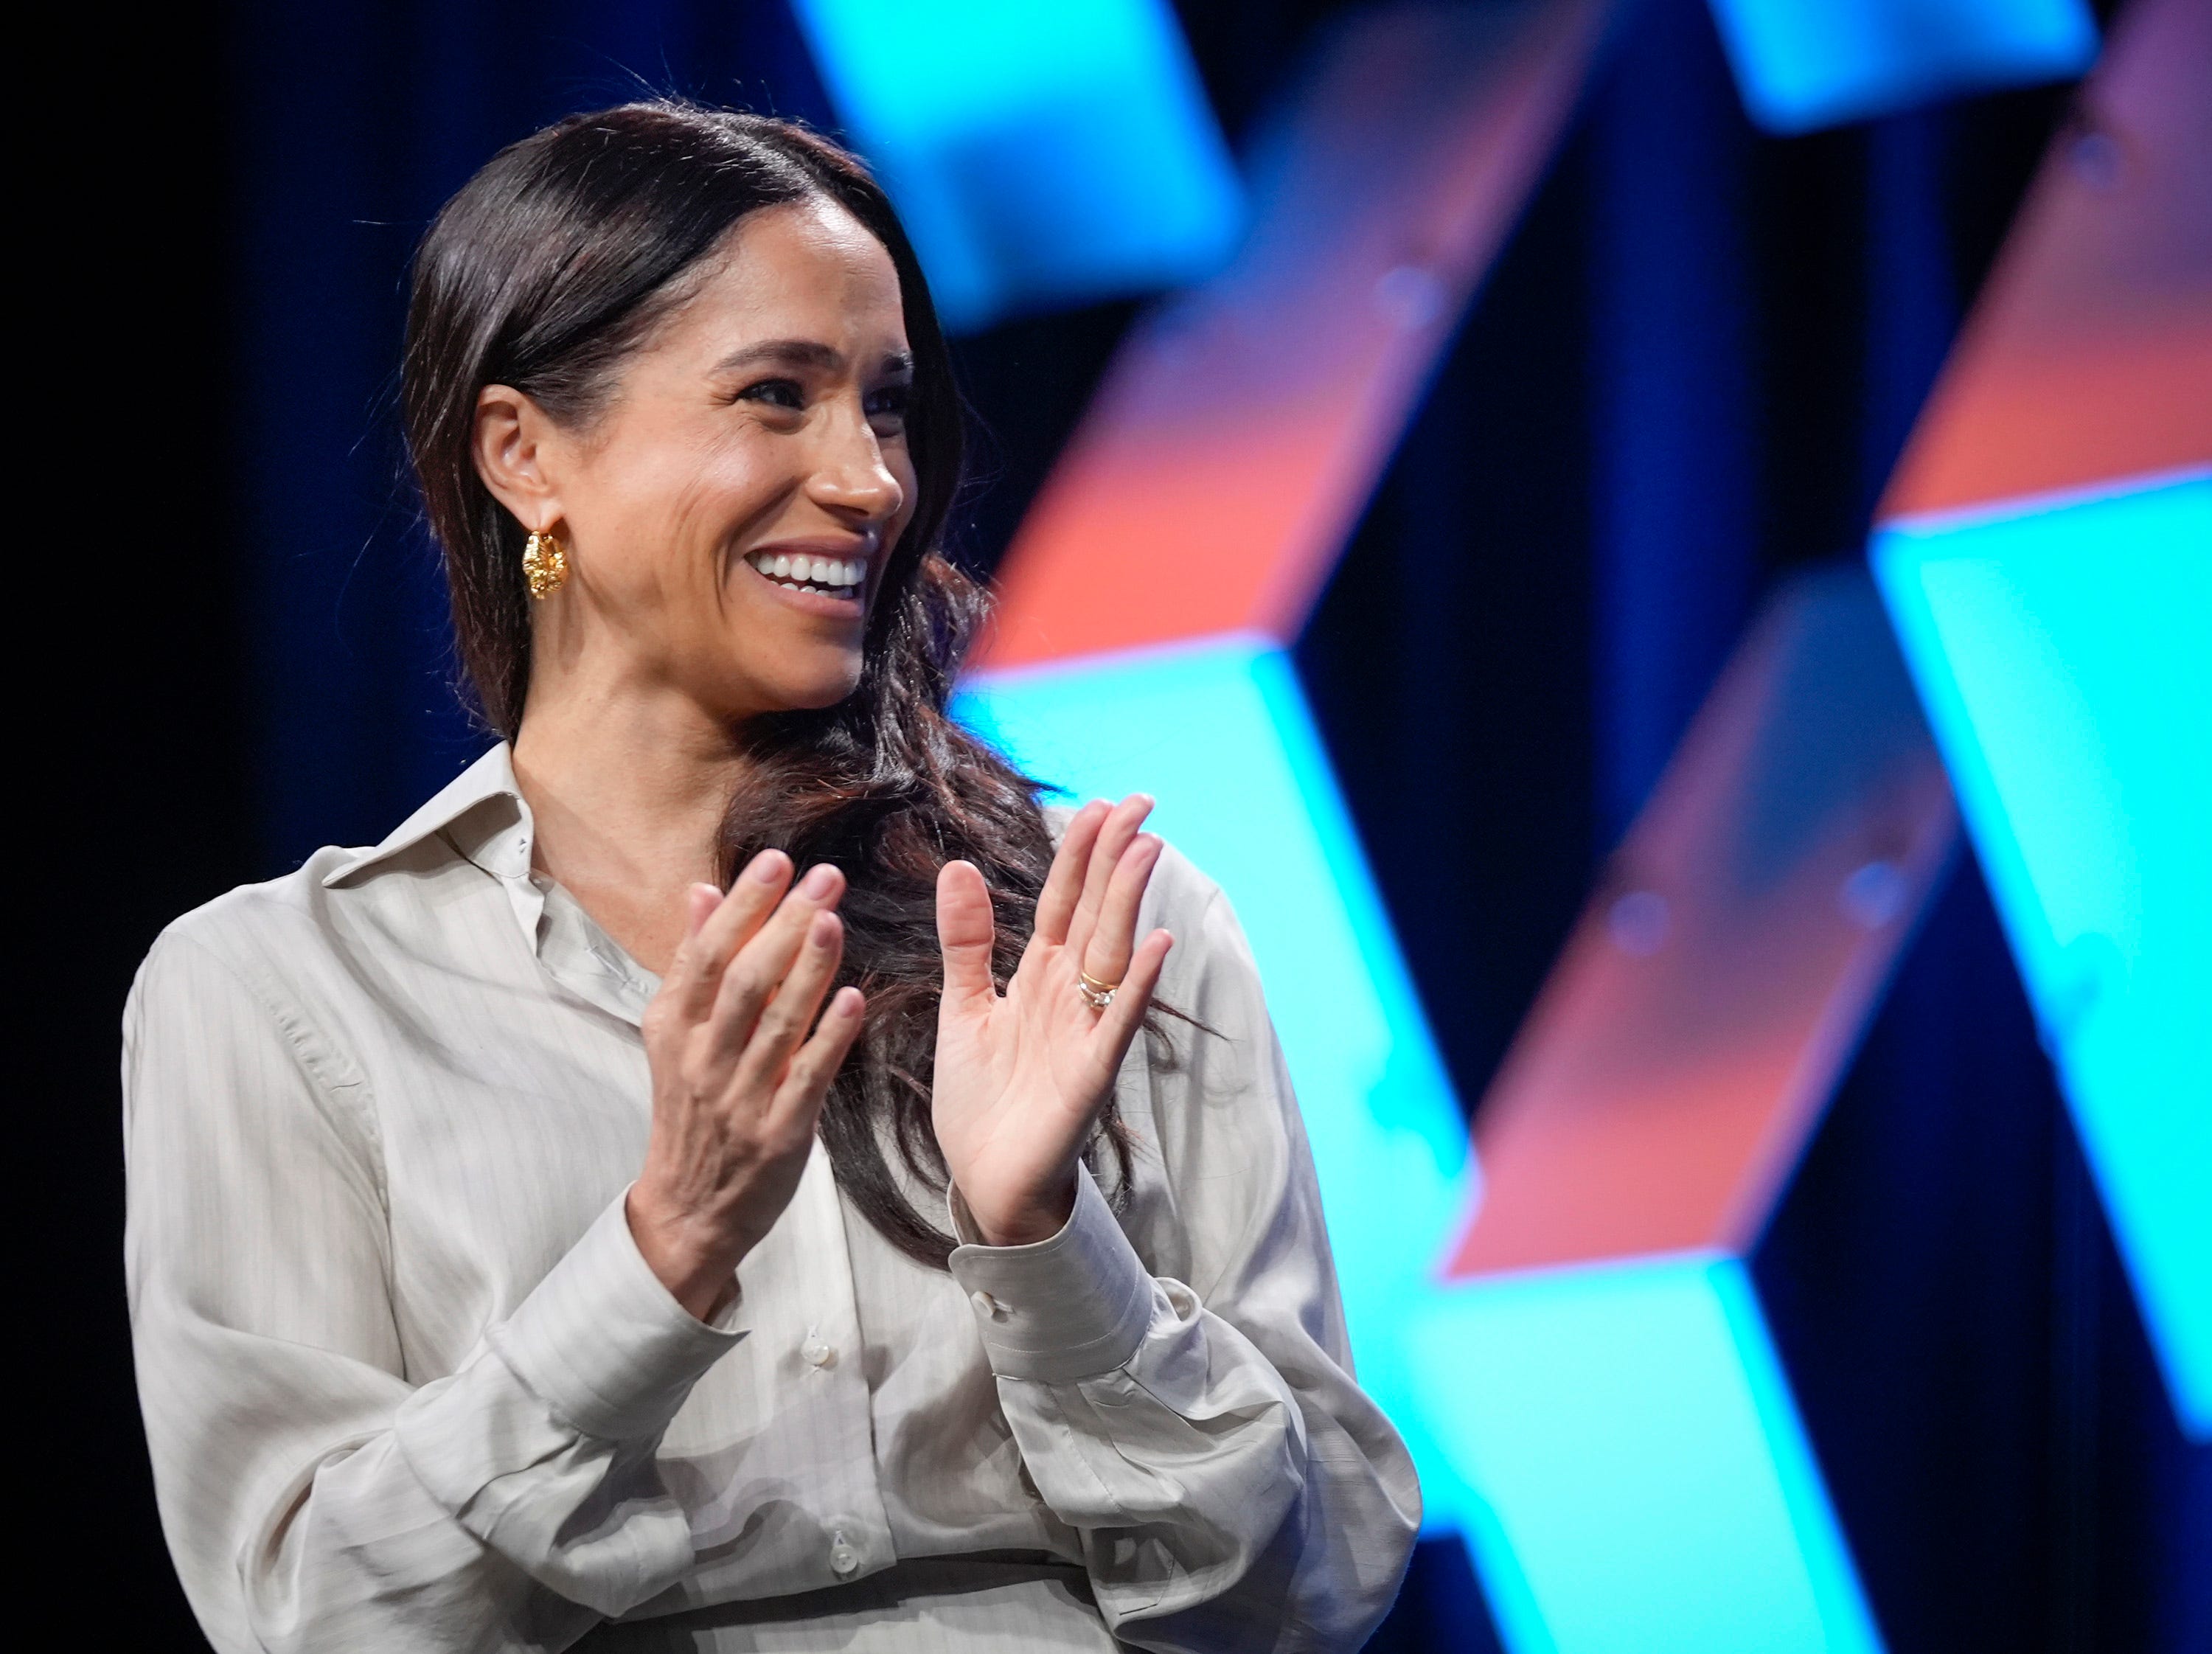 Meghan, The Duchess of Sussex is introduced at the keynote Ã¢â¬ÅBreaking Barriers, Shaping Narratives: How Women Lead On and Off the ScreenÃ¢â¬Â at SXSW at the Austin Convention Center Friday March 8, 2024.